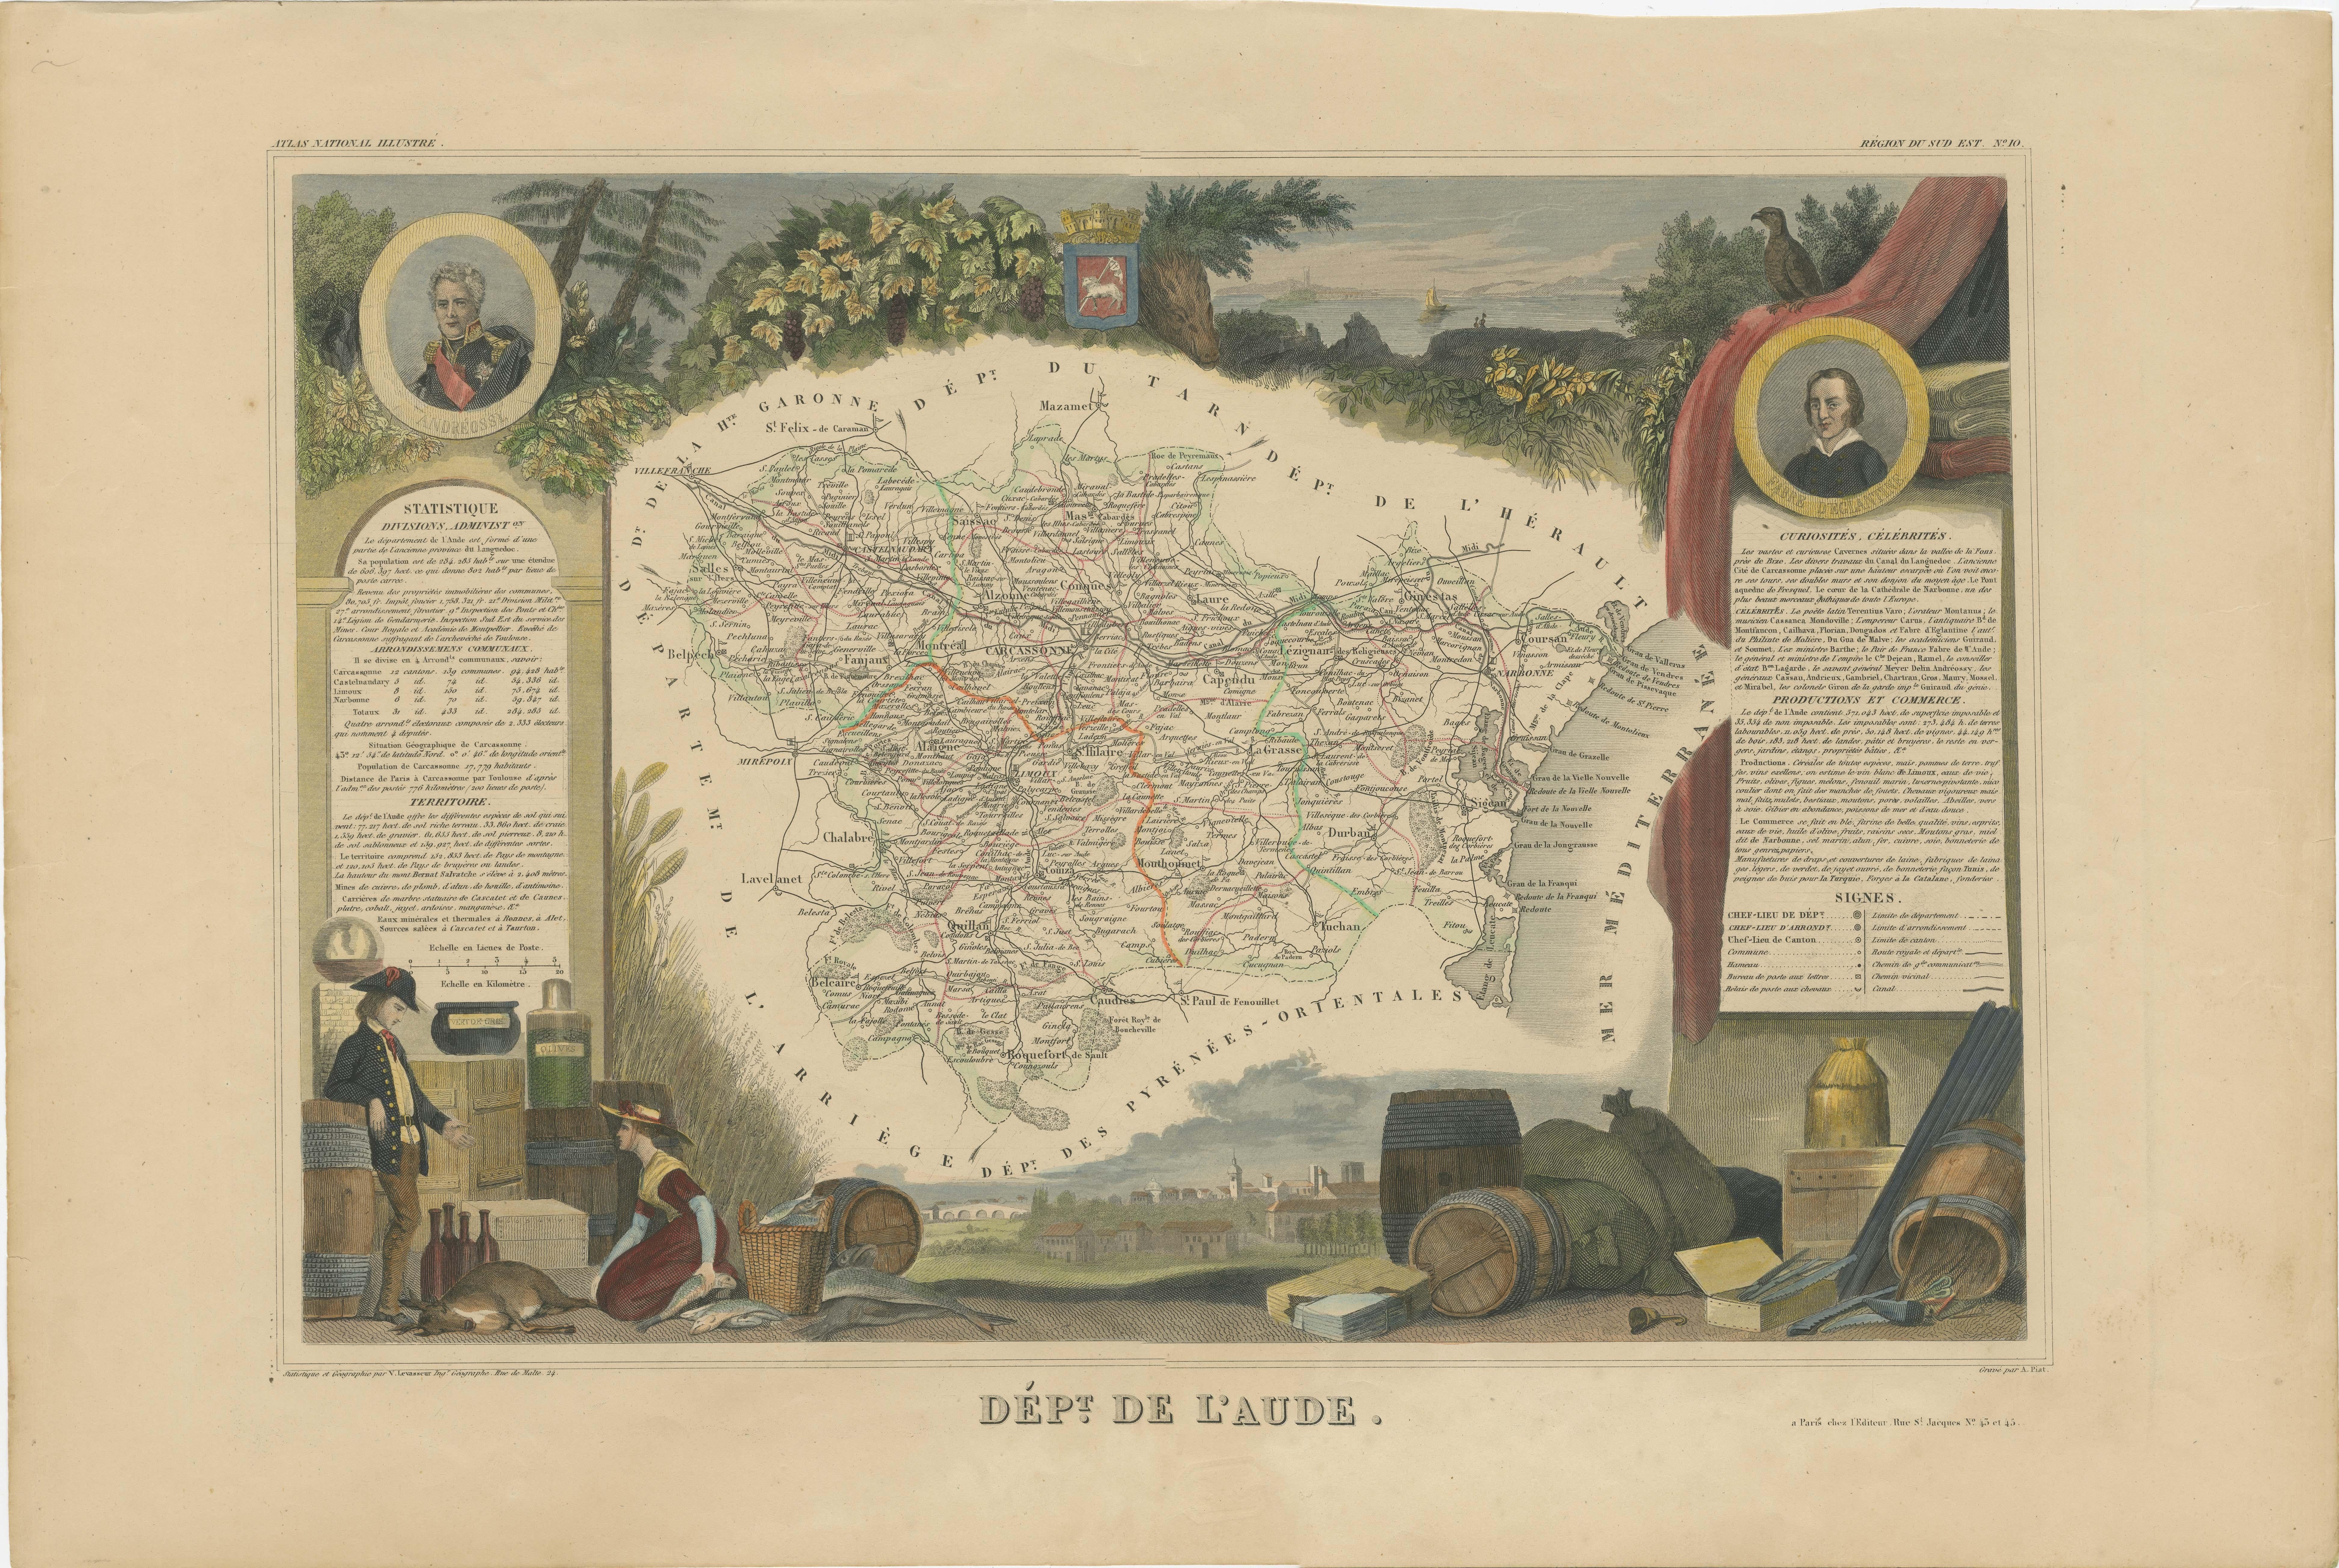 Antique map titled 'Dépt. de l'Aude'. Map of the French department of Aude, France. This area of France is famous for its wide variety of vineyards and wine production. In the east are the wines of Corbieres and la Clape, in the center are Minervois